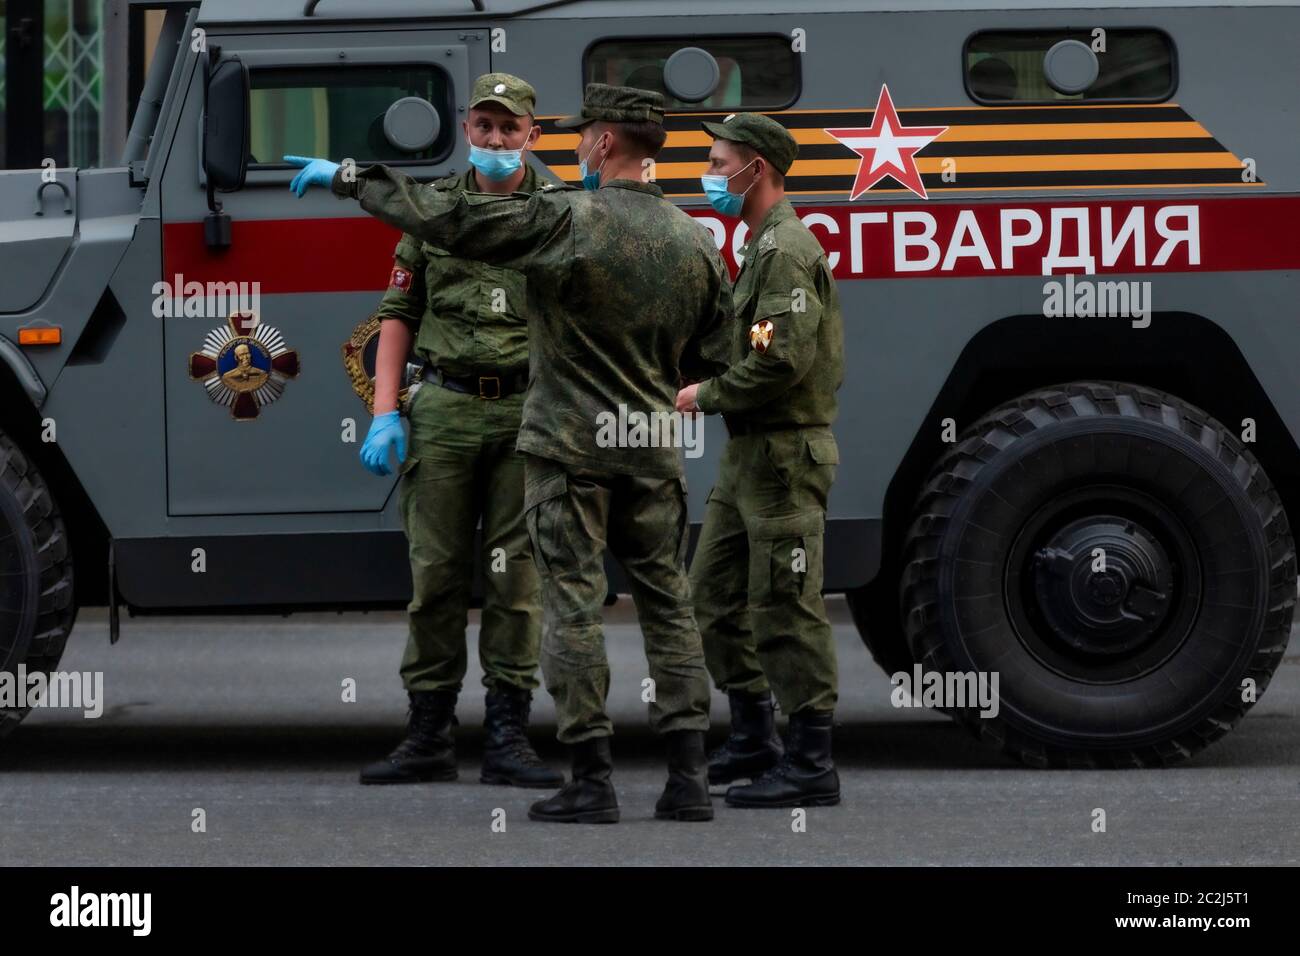 Moscow, Russia. 17th of June, 2020 Russian Rosguardia (National Guard) soldiers wearing face masks and gloves to protect against novel coronavirus, takes part in a rehearsal of a military parade marking the 75th anniversary of Victory in WWII, on Tverskaya street in Moscow, Russia. The inscription on the side of an armored car reads 'Rosguardia' Stock Photo